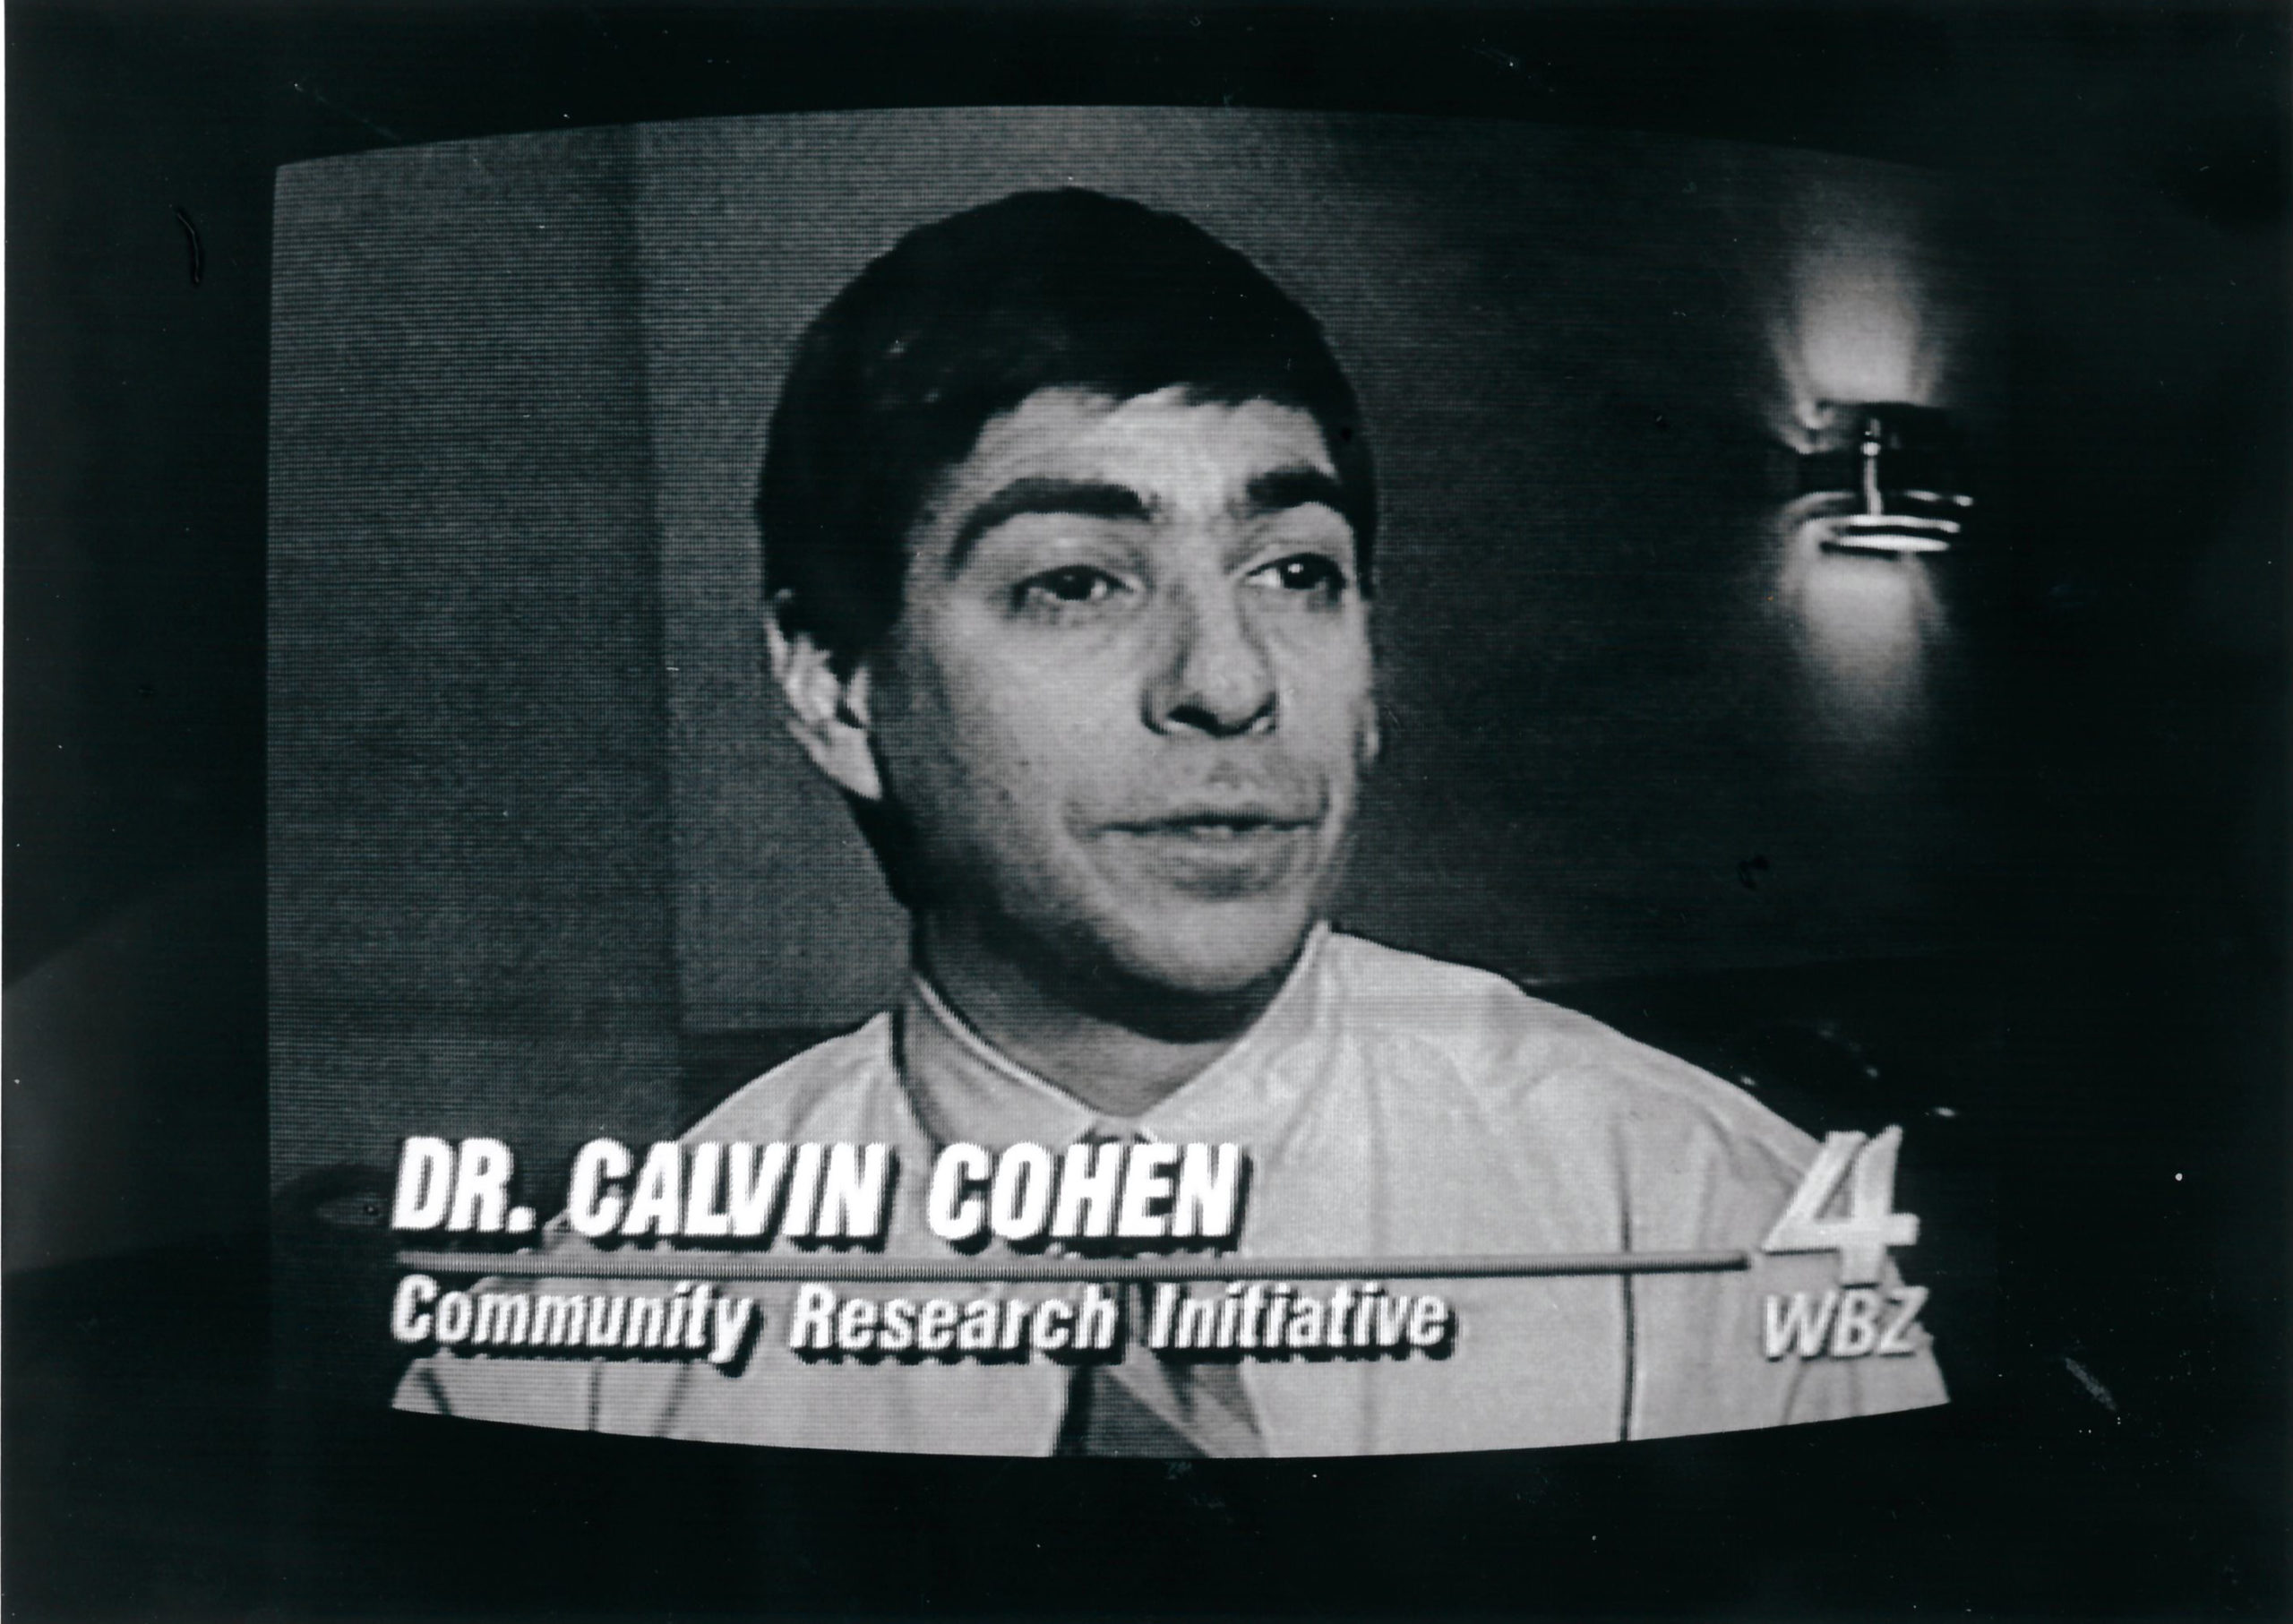 Call Cohen on WBZ television- Historic image